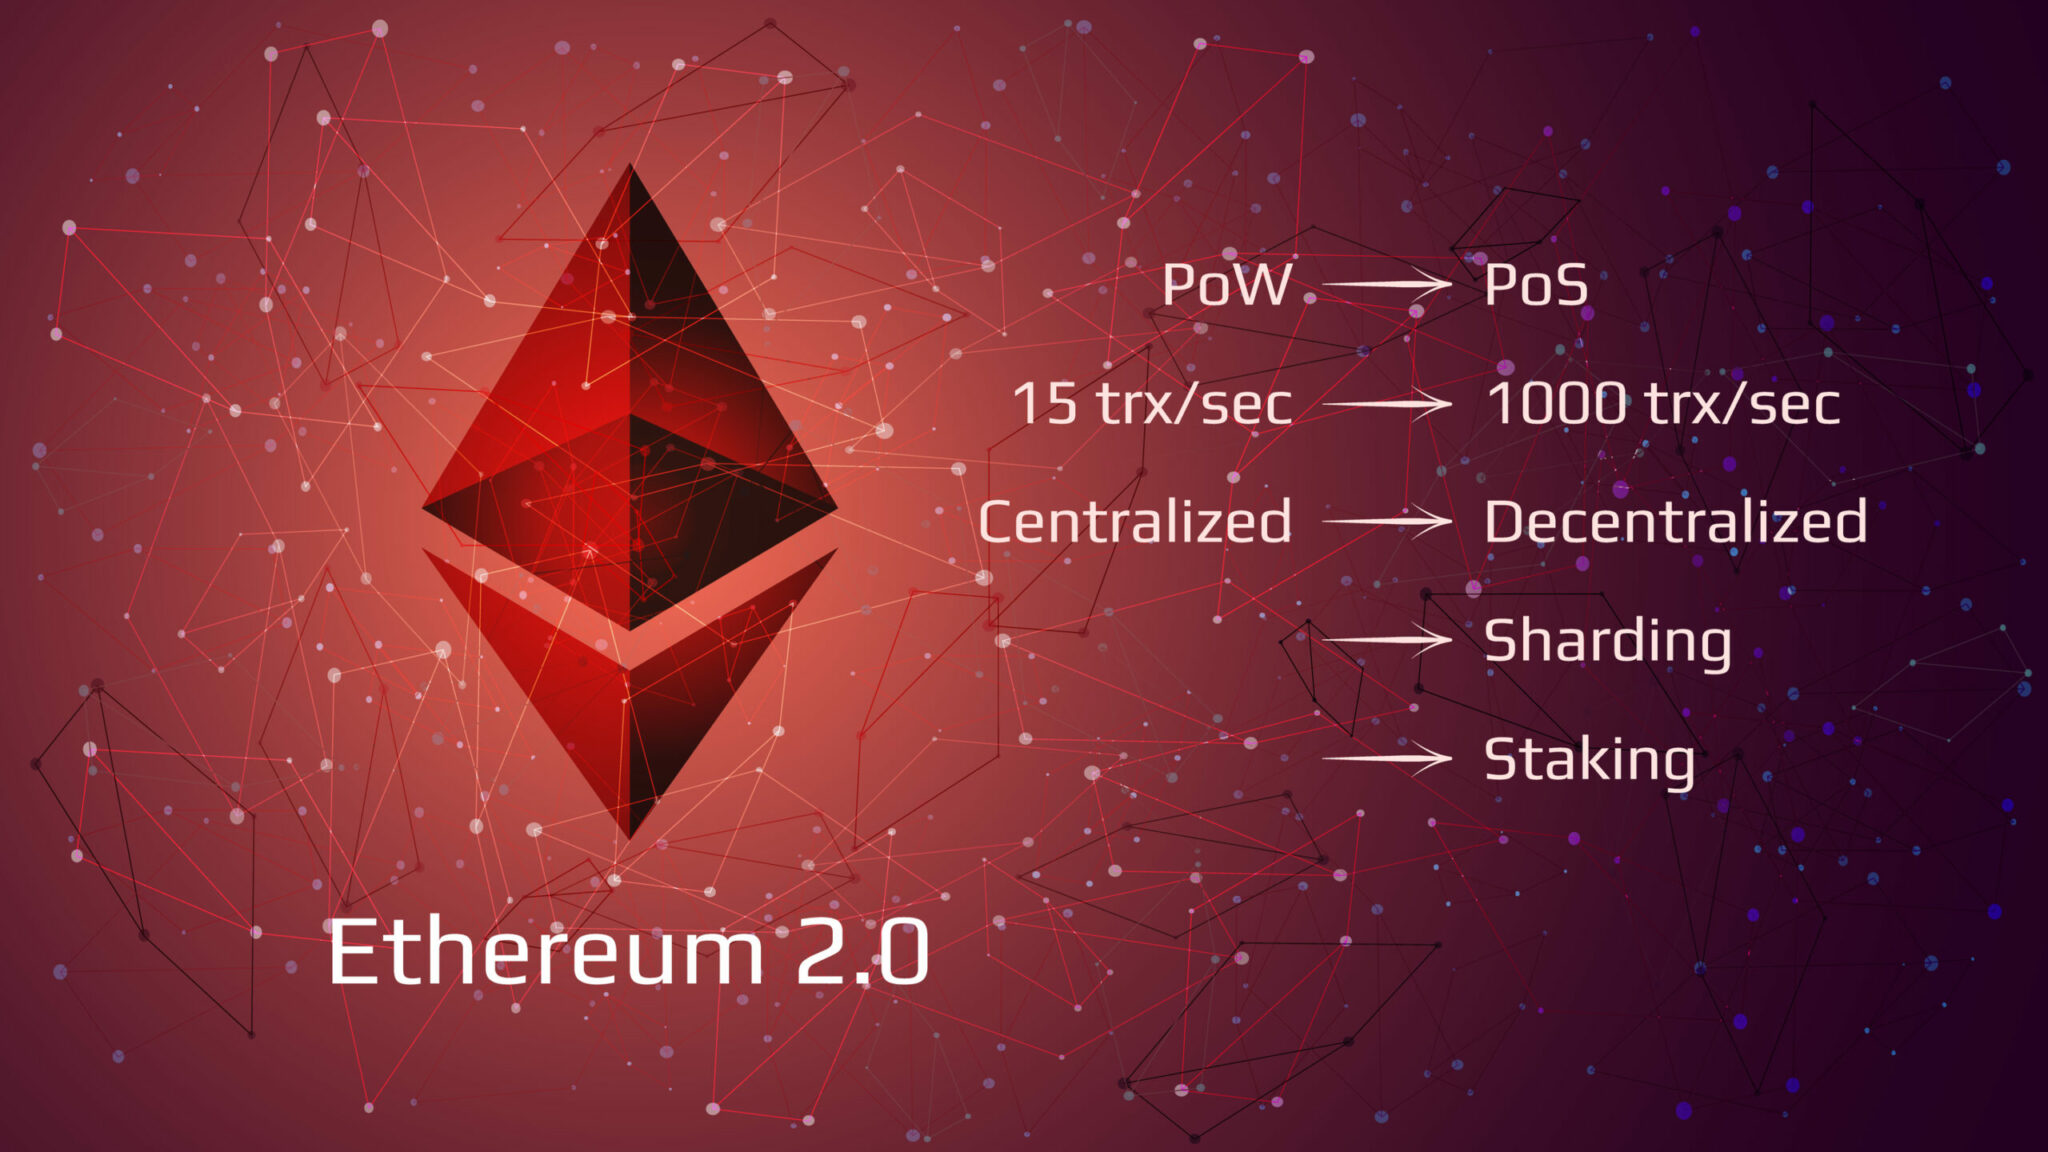 ethereum is centralized